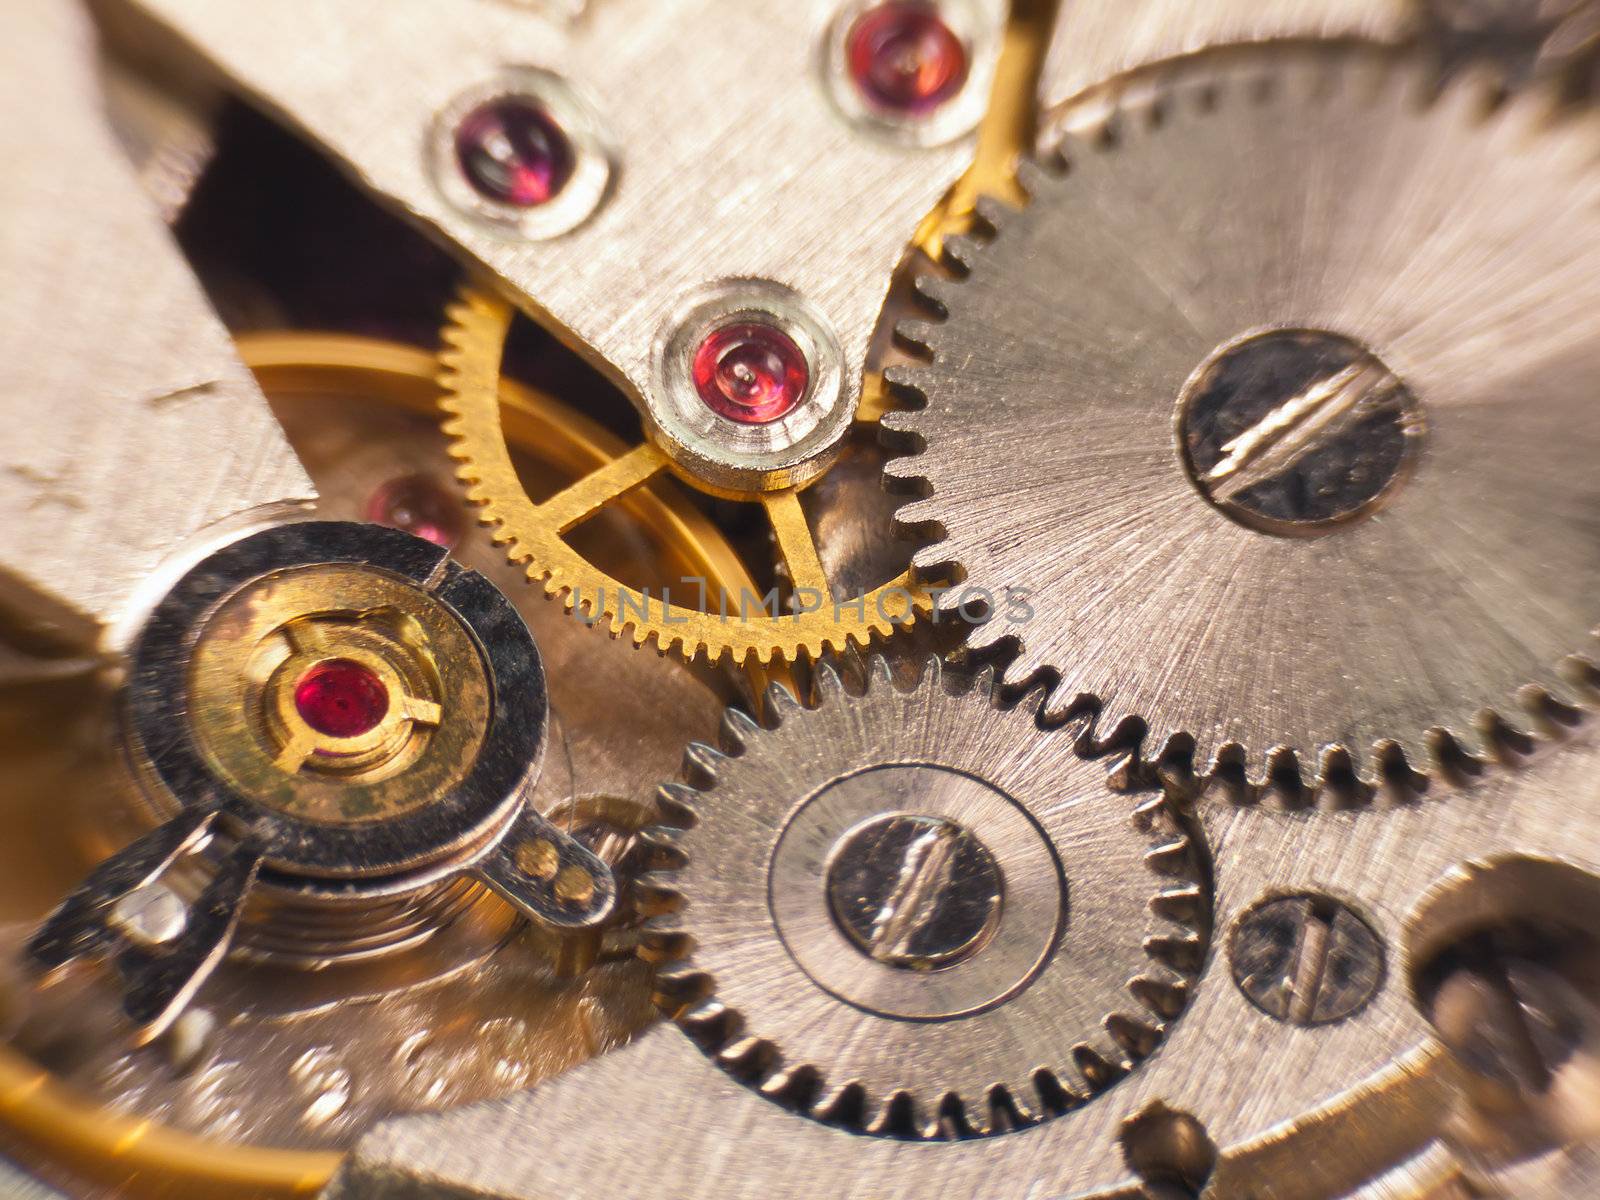 Macro photo of the mechanism of a watch soft focus